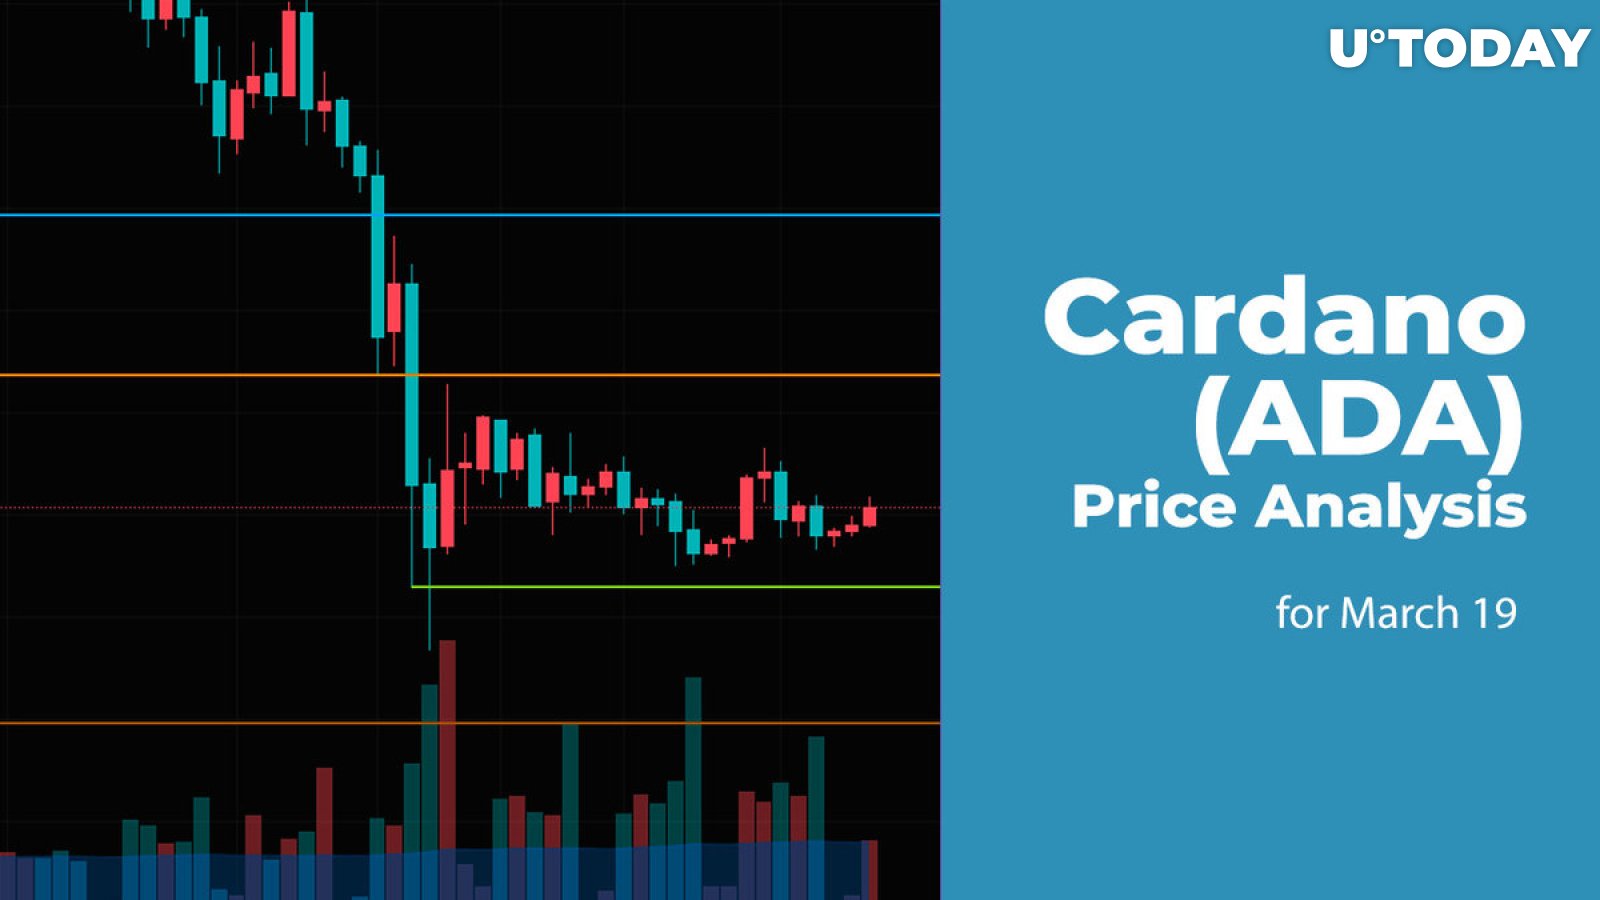 Cardano (ADA) Price Analysis for March 19